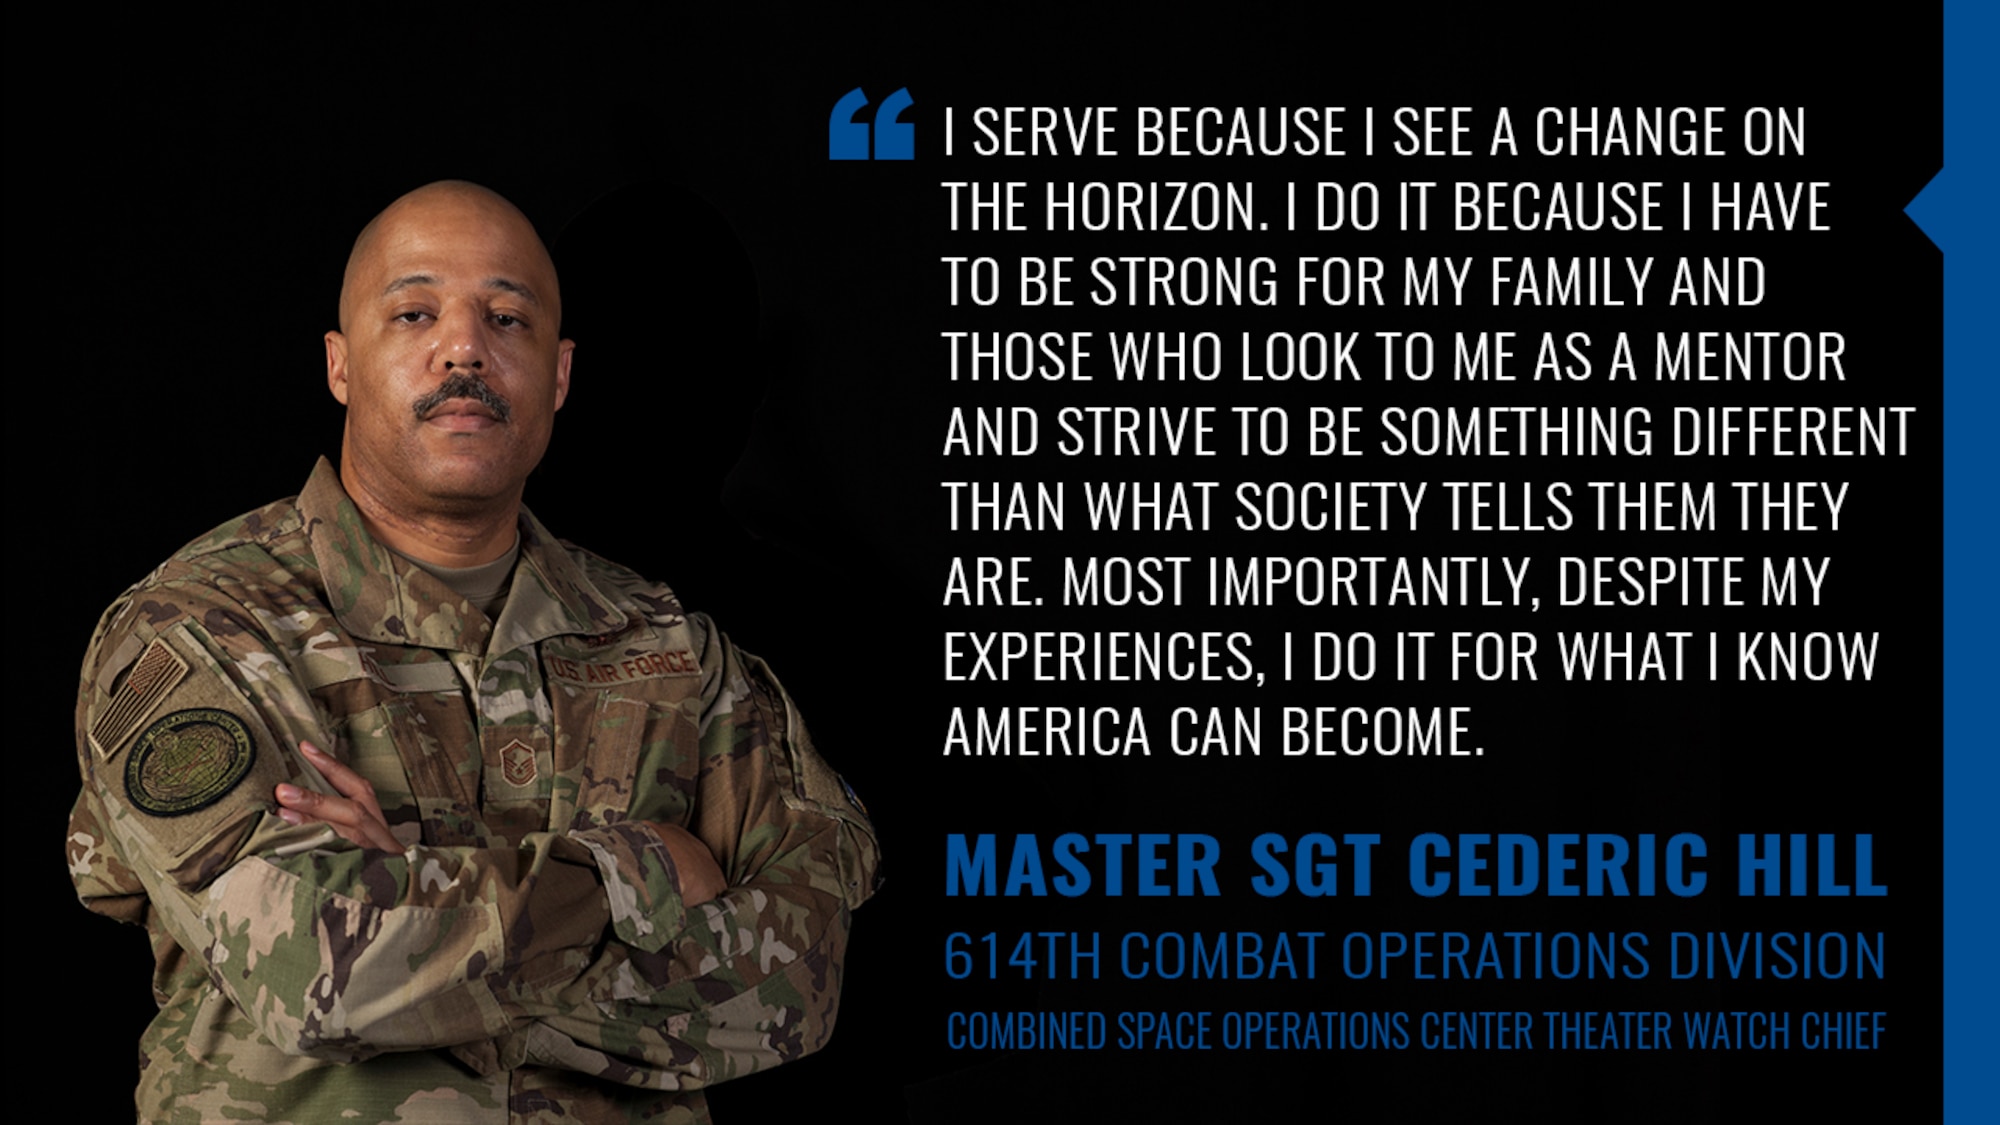 In light of recent nationwide events, Master Sgt. Cederic Hill, 614th Combat Operations Division Combined Space Operations Center theater watch chief, decided to share his story as a black man in America and the military.